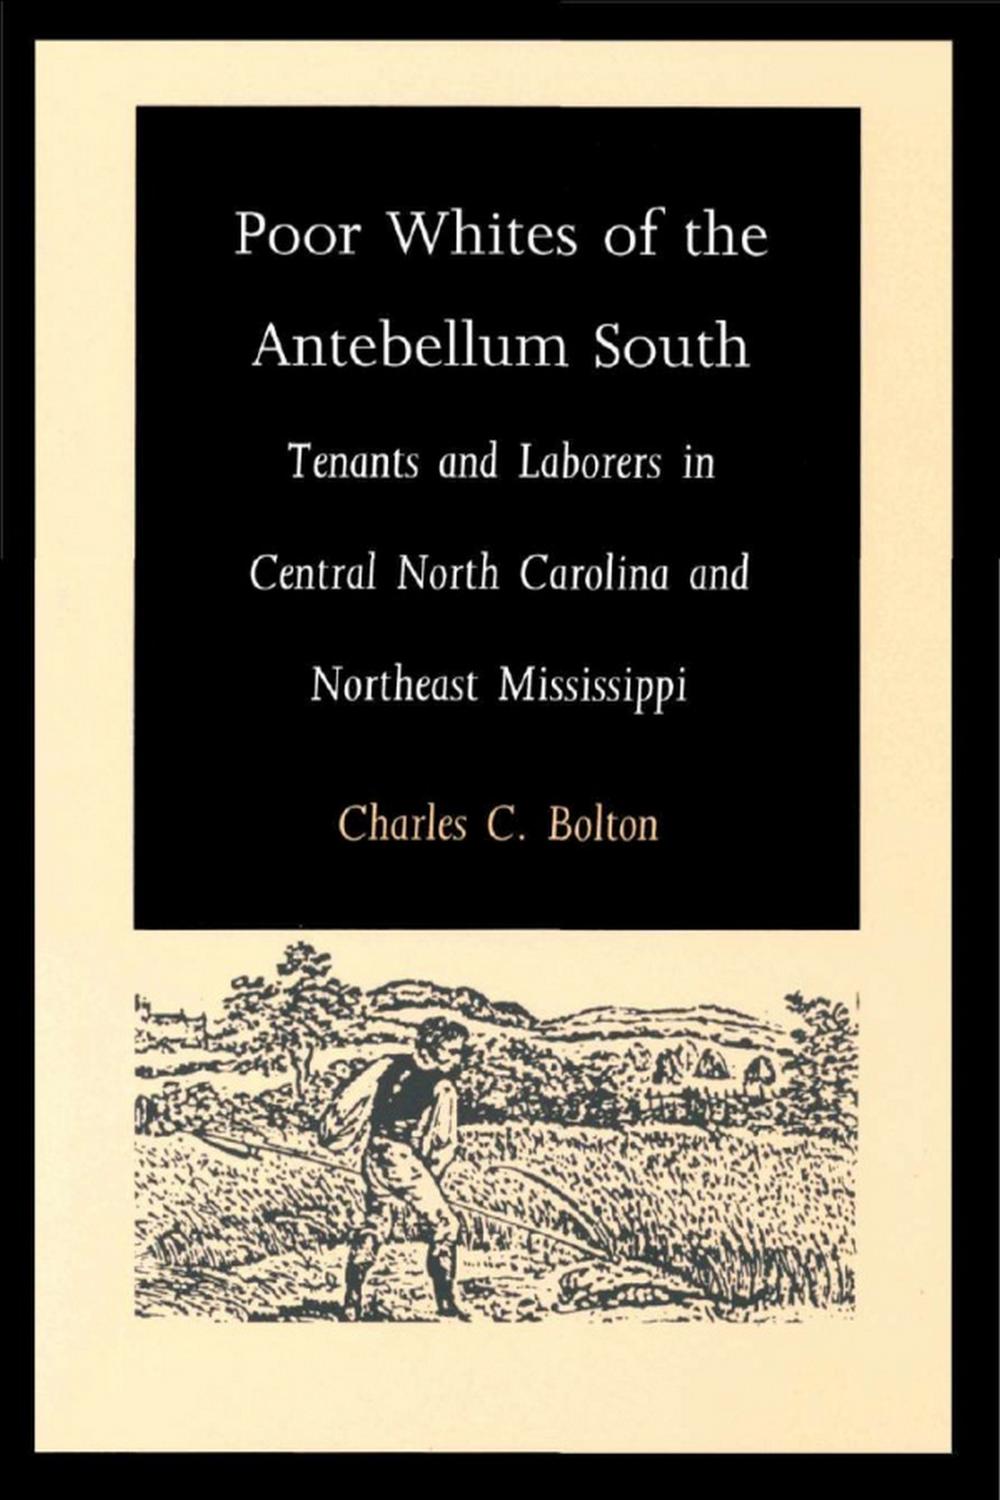 Poor Whites of the Antebellum South - Charles C. Bolton